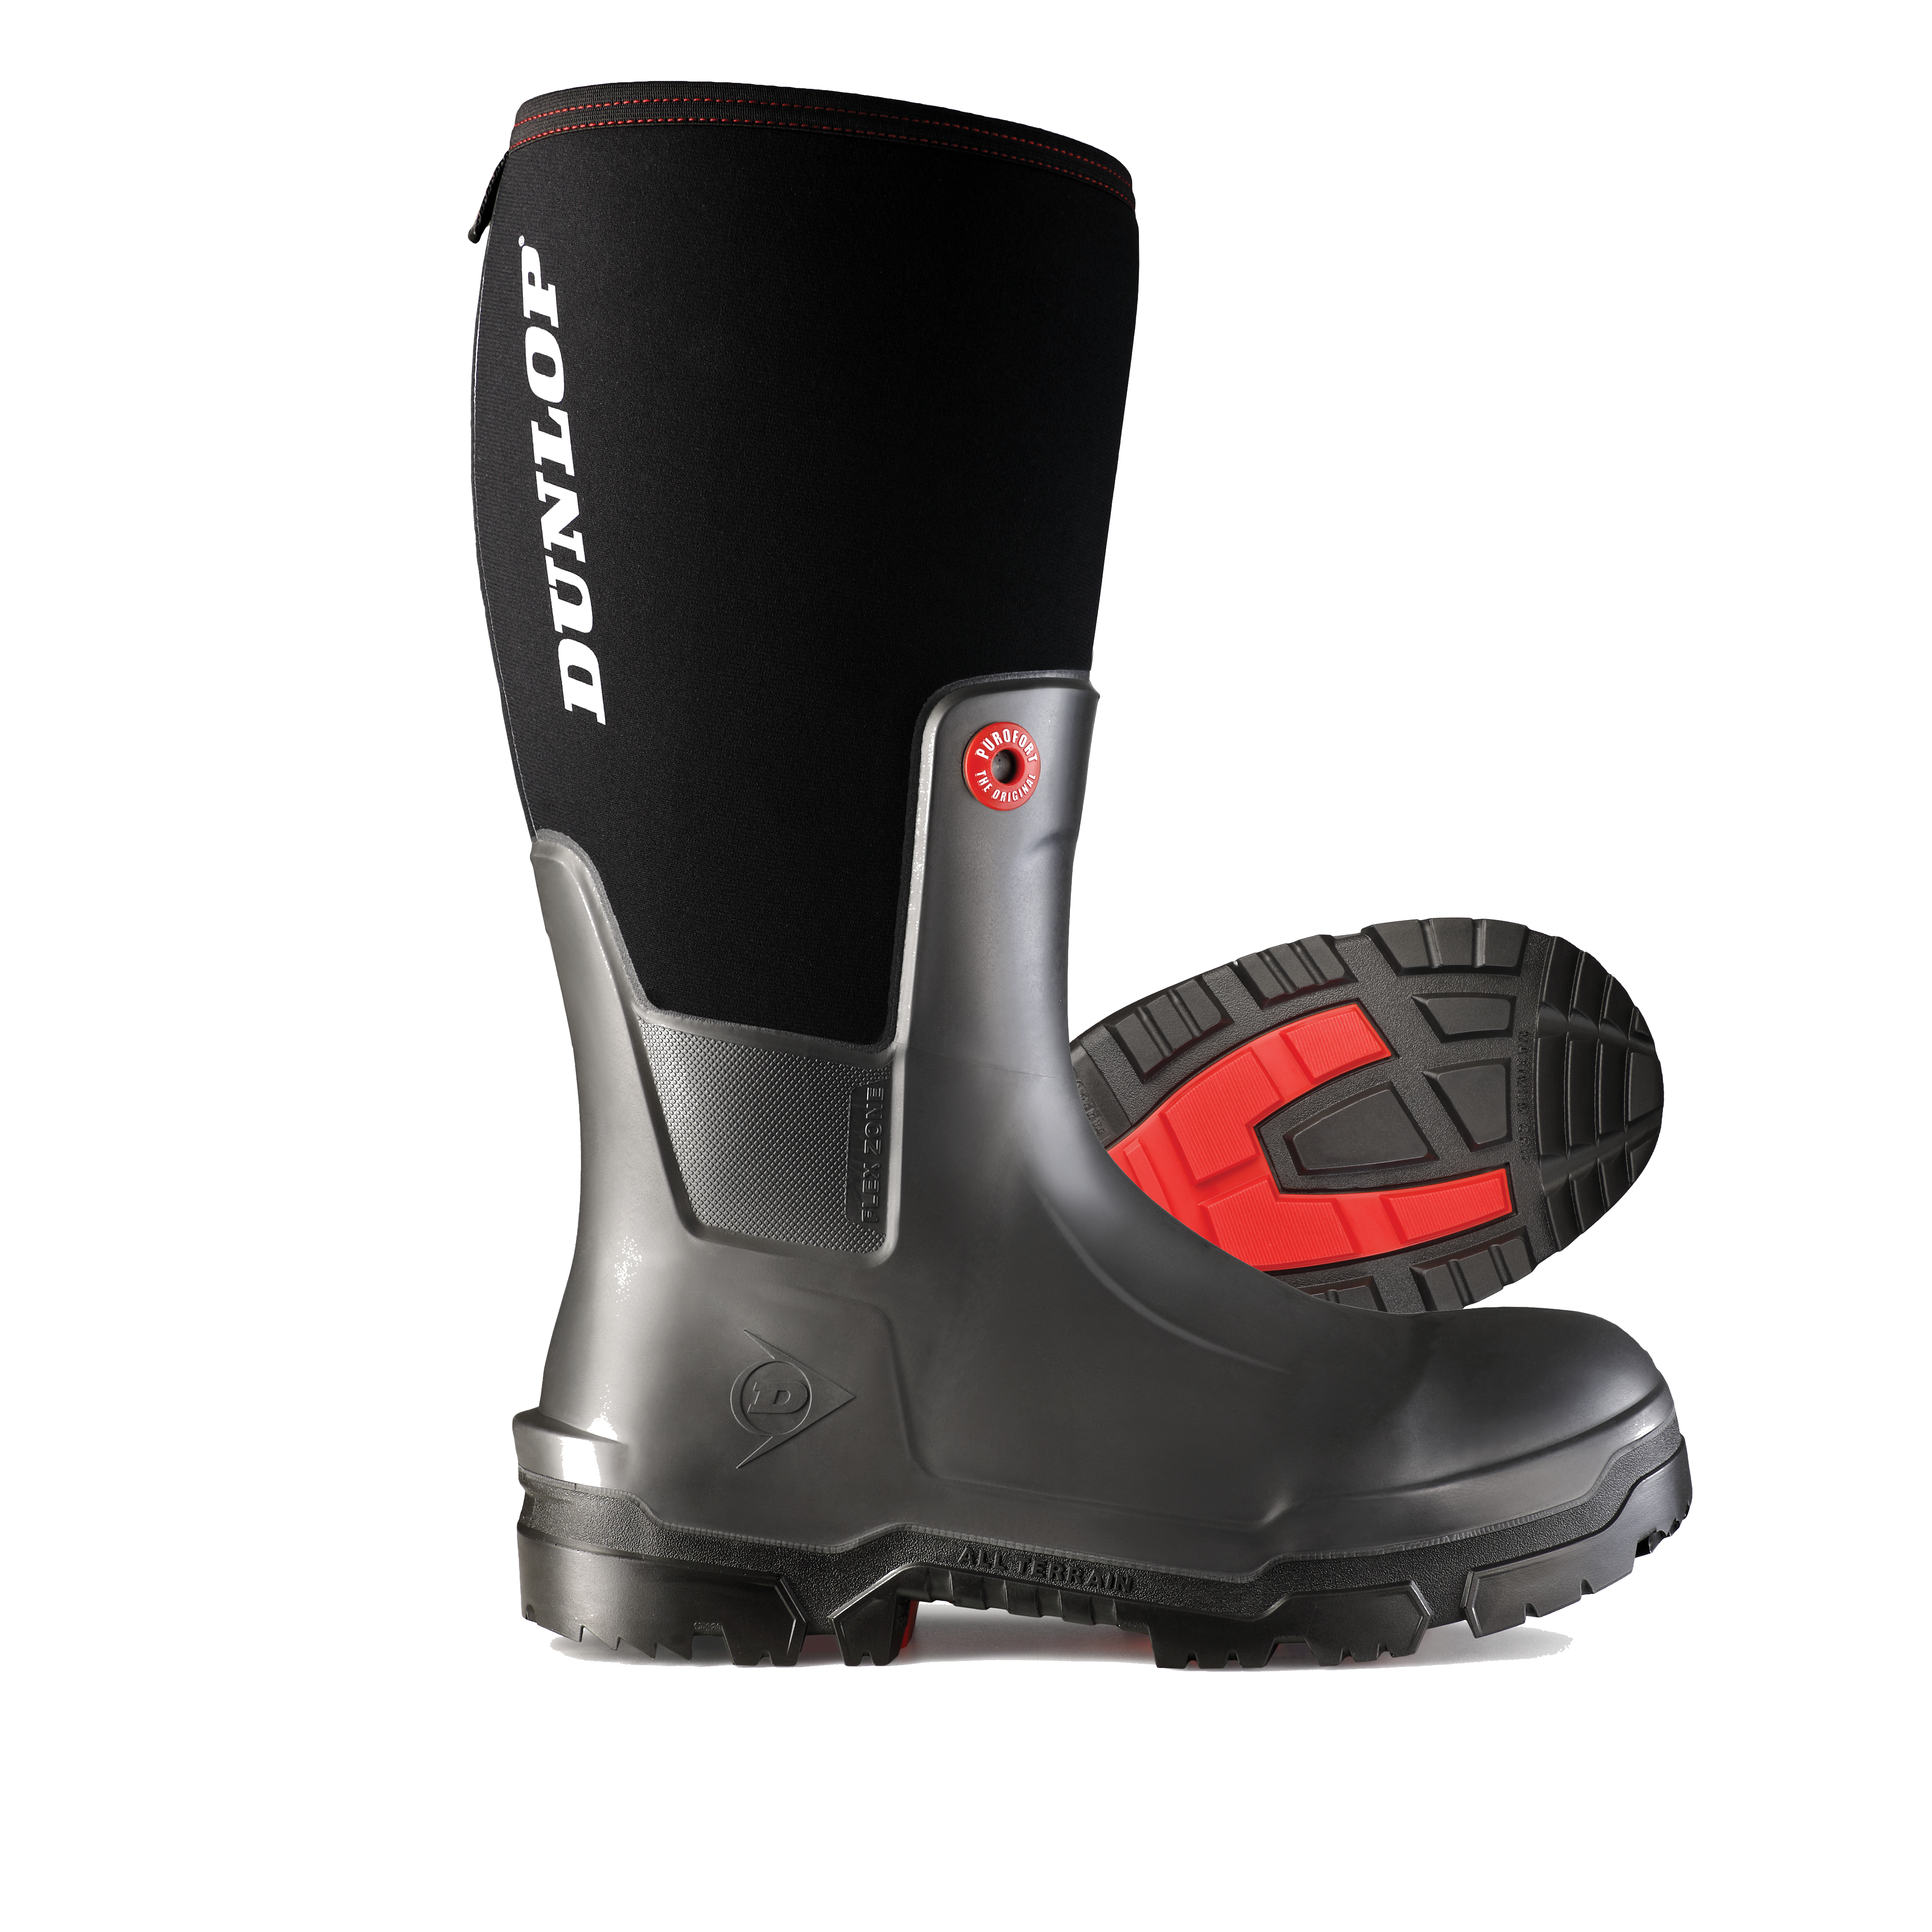 'Reed' Dunlop Snugboot Pioneer Insulated WP Boot - Black